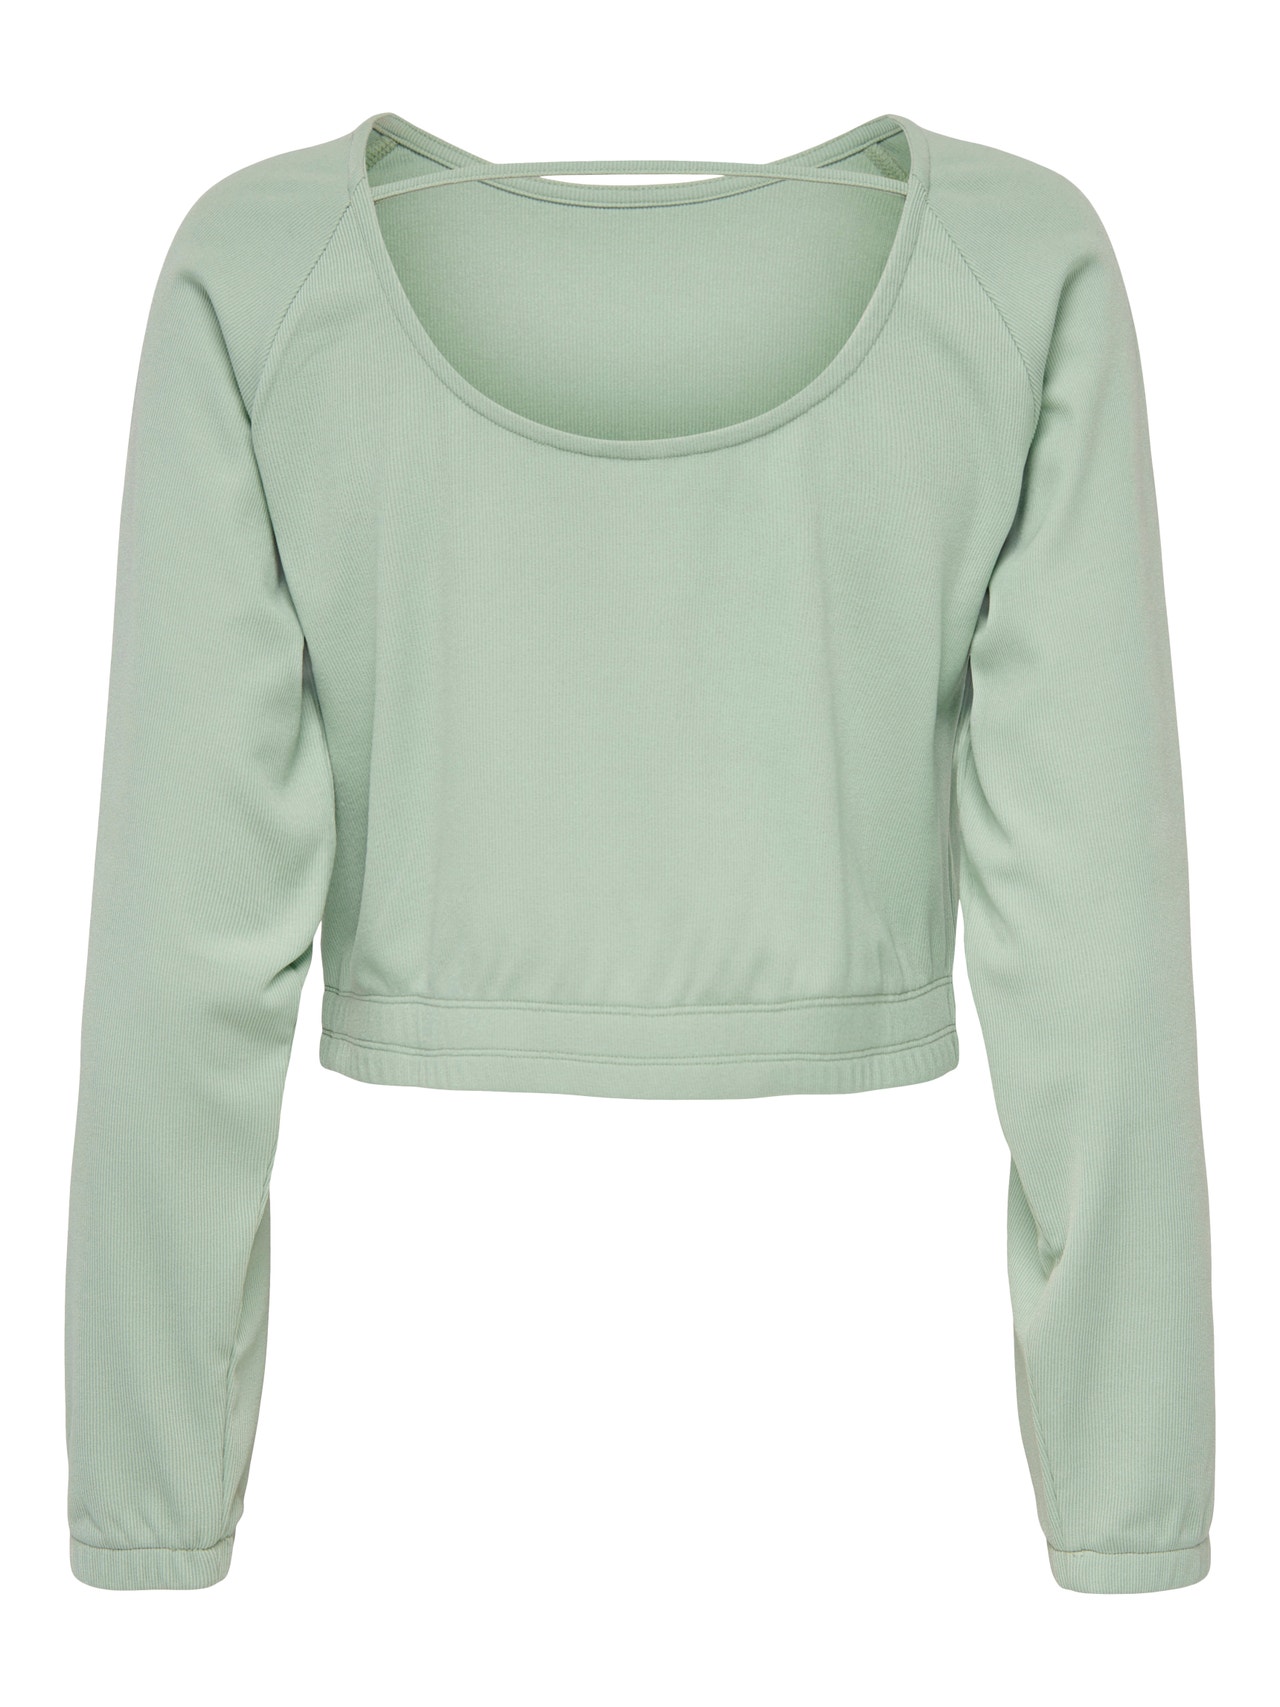 ONLY Raccourci Top -Frosty Green - 15244796